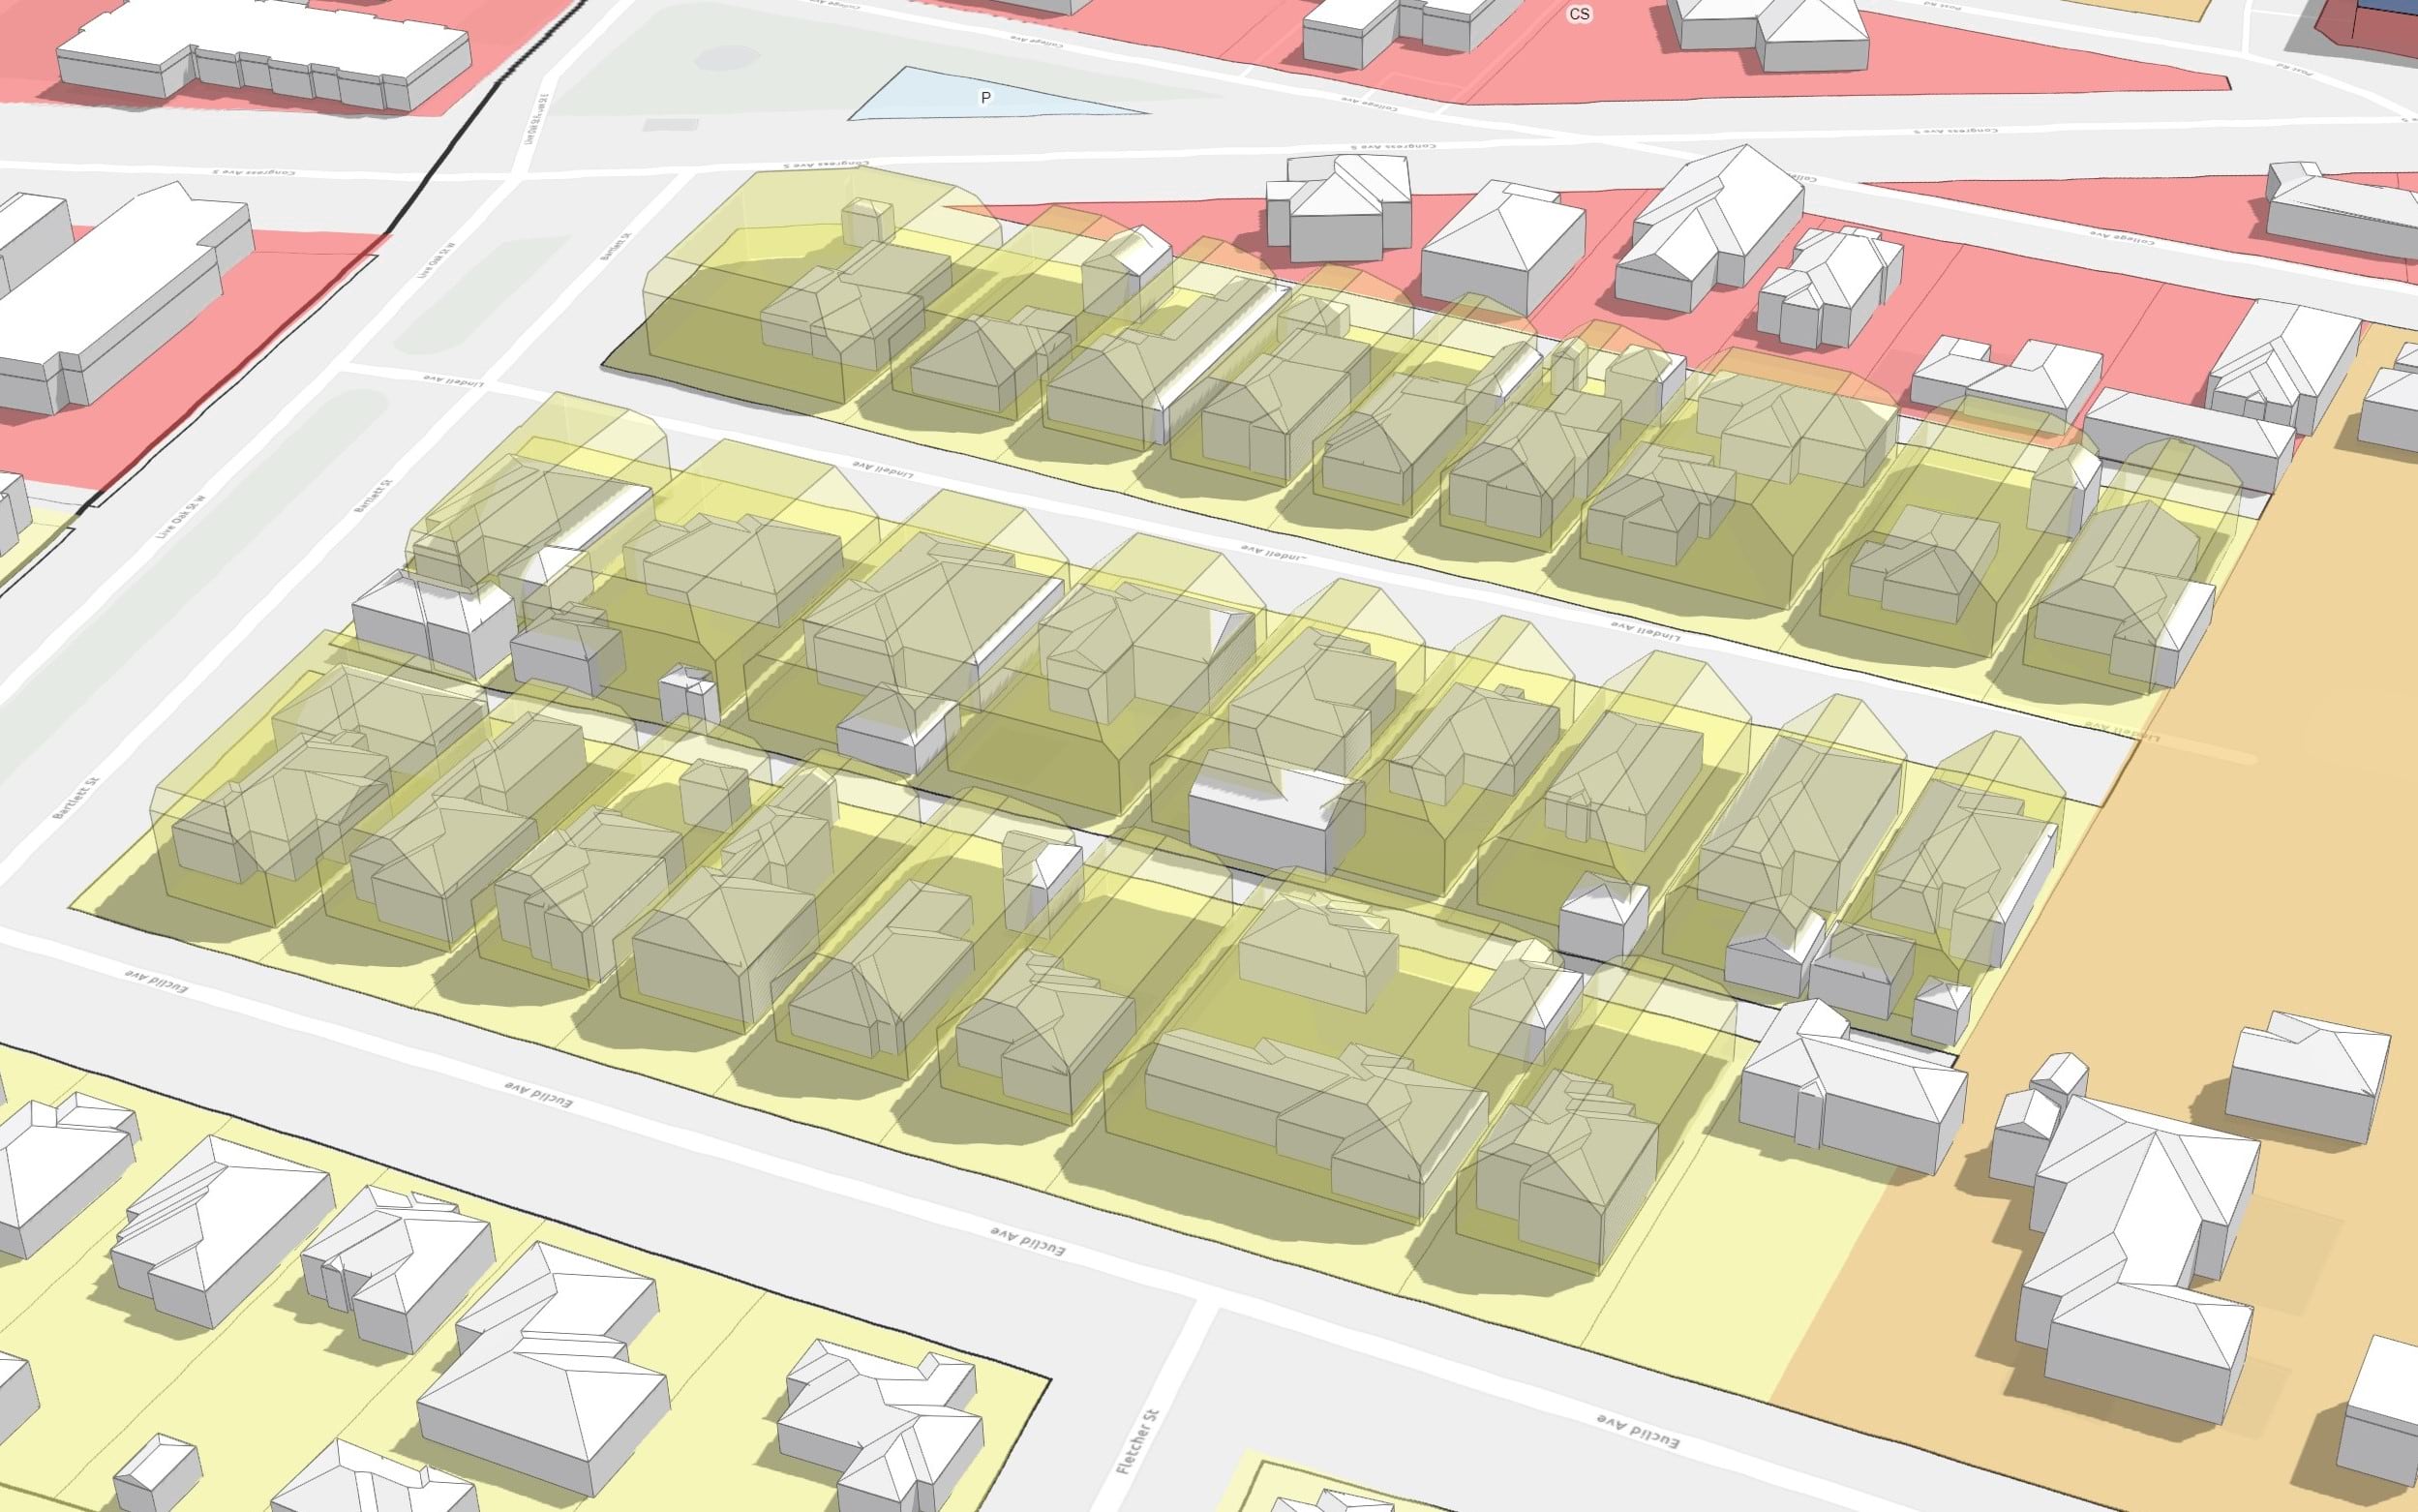 Zoning envelopes with skyplanes compared to existing buildings.